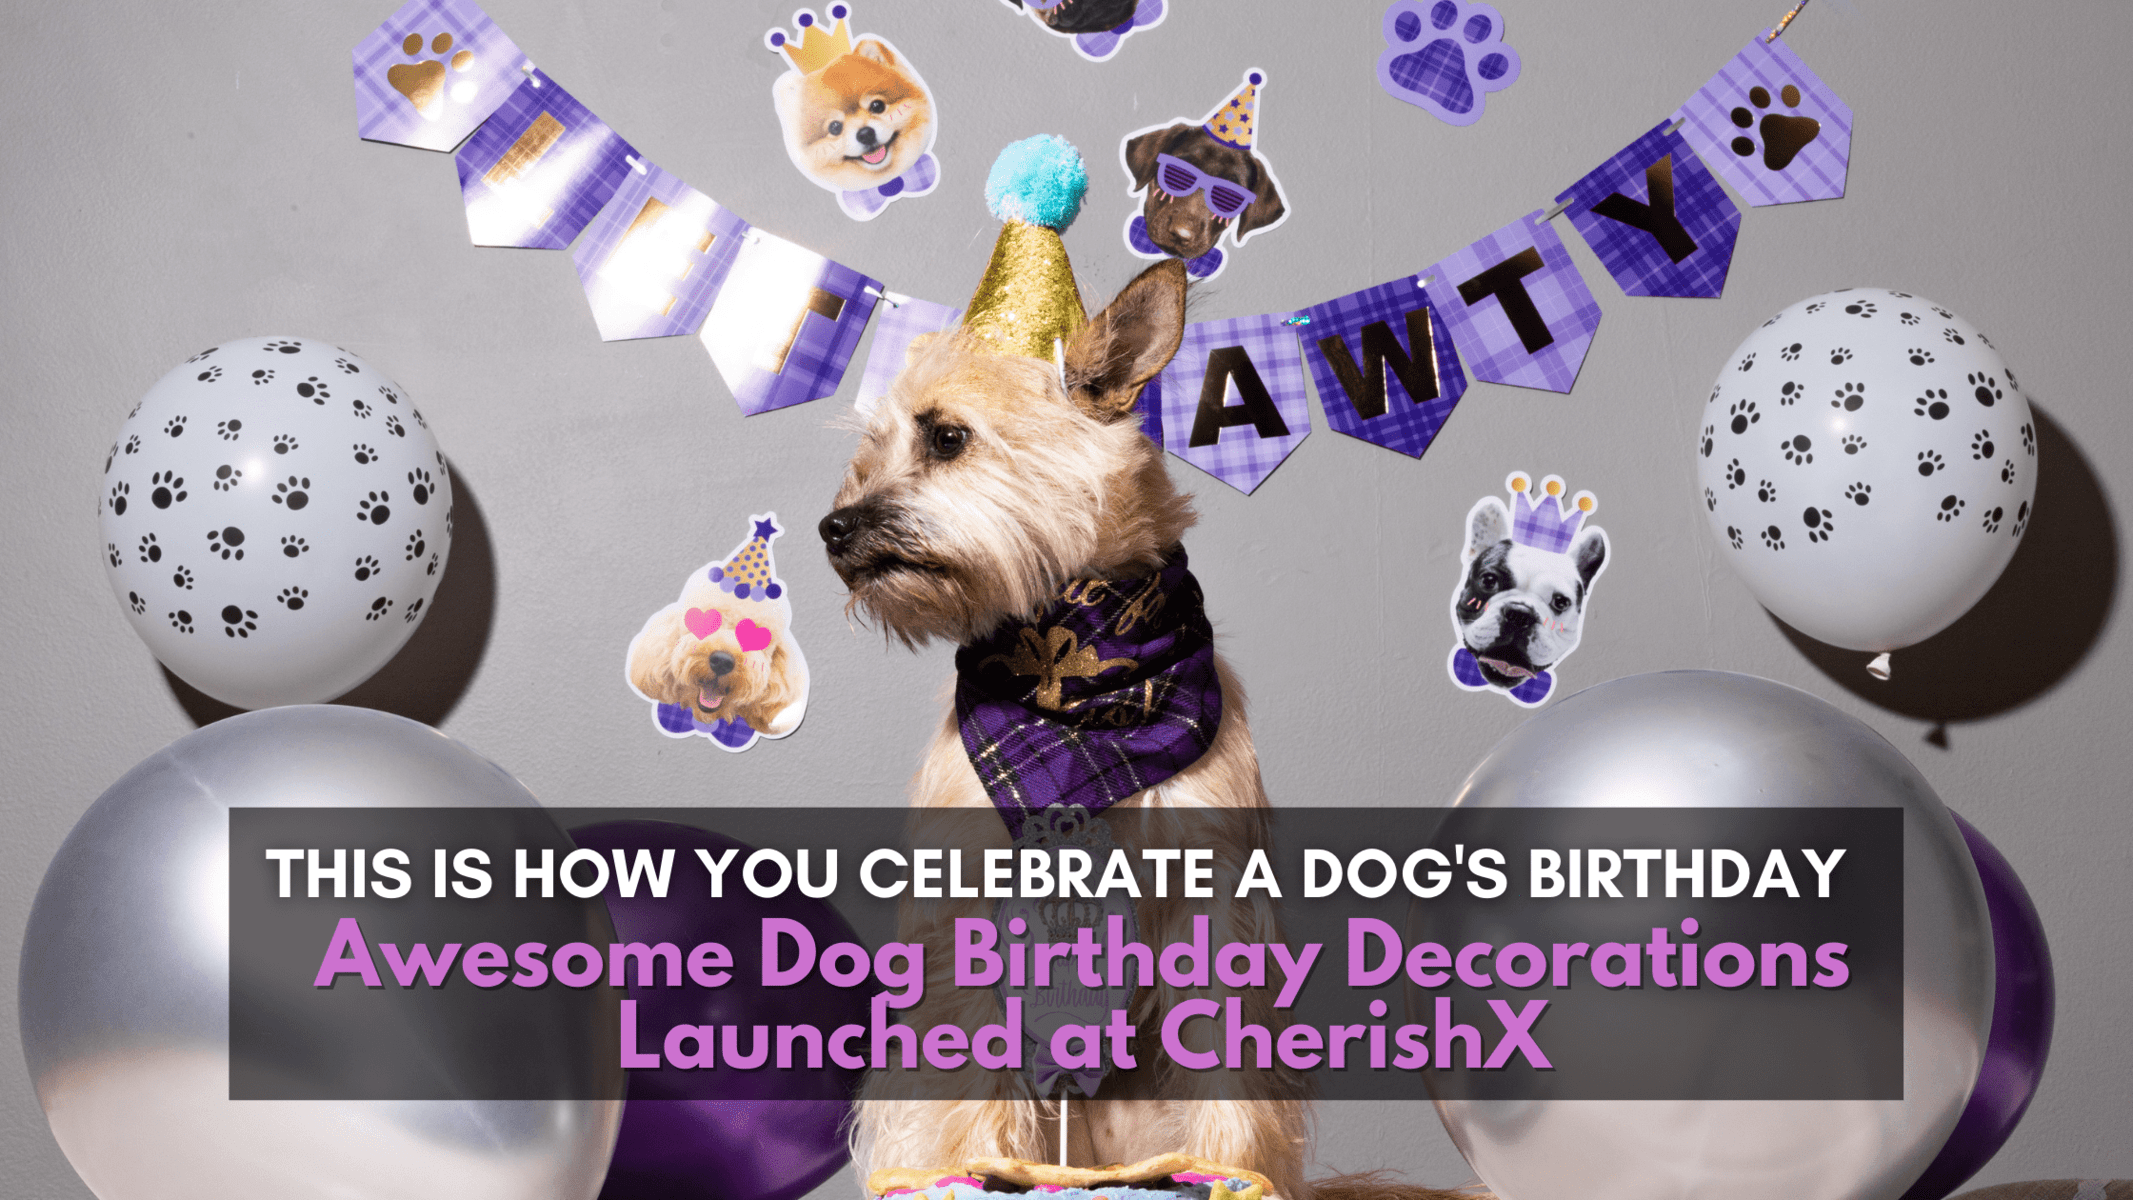 This is How You Celebrate a Dog’s Birthday- Awesome Pet Birthday Decorations Launched at CherishX